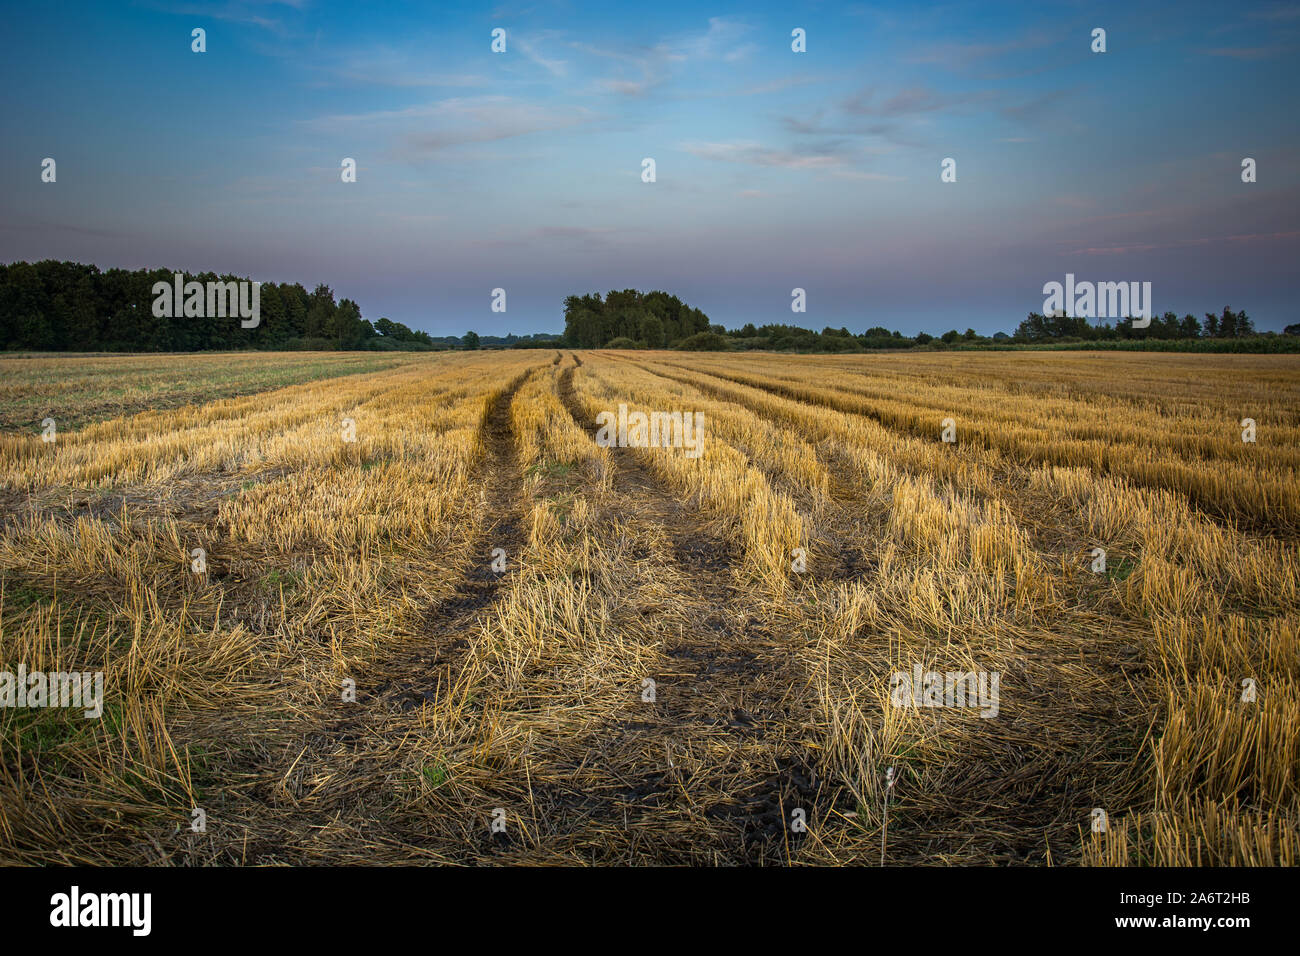 Traces of wheels on the field, horizon and colorful evening sky Stock Photo